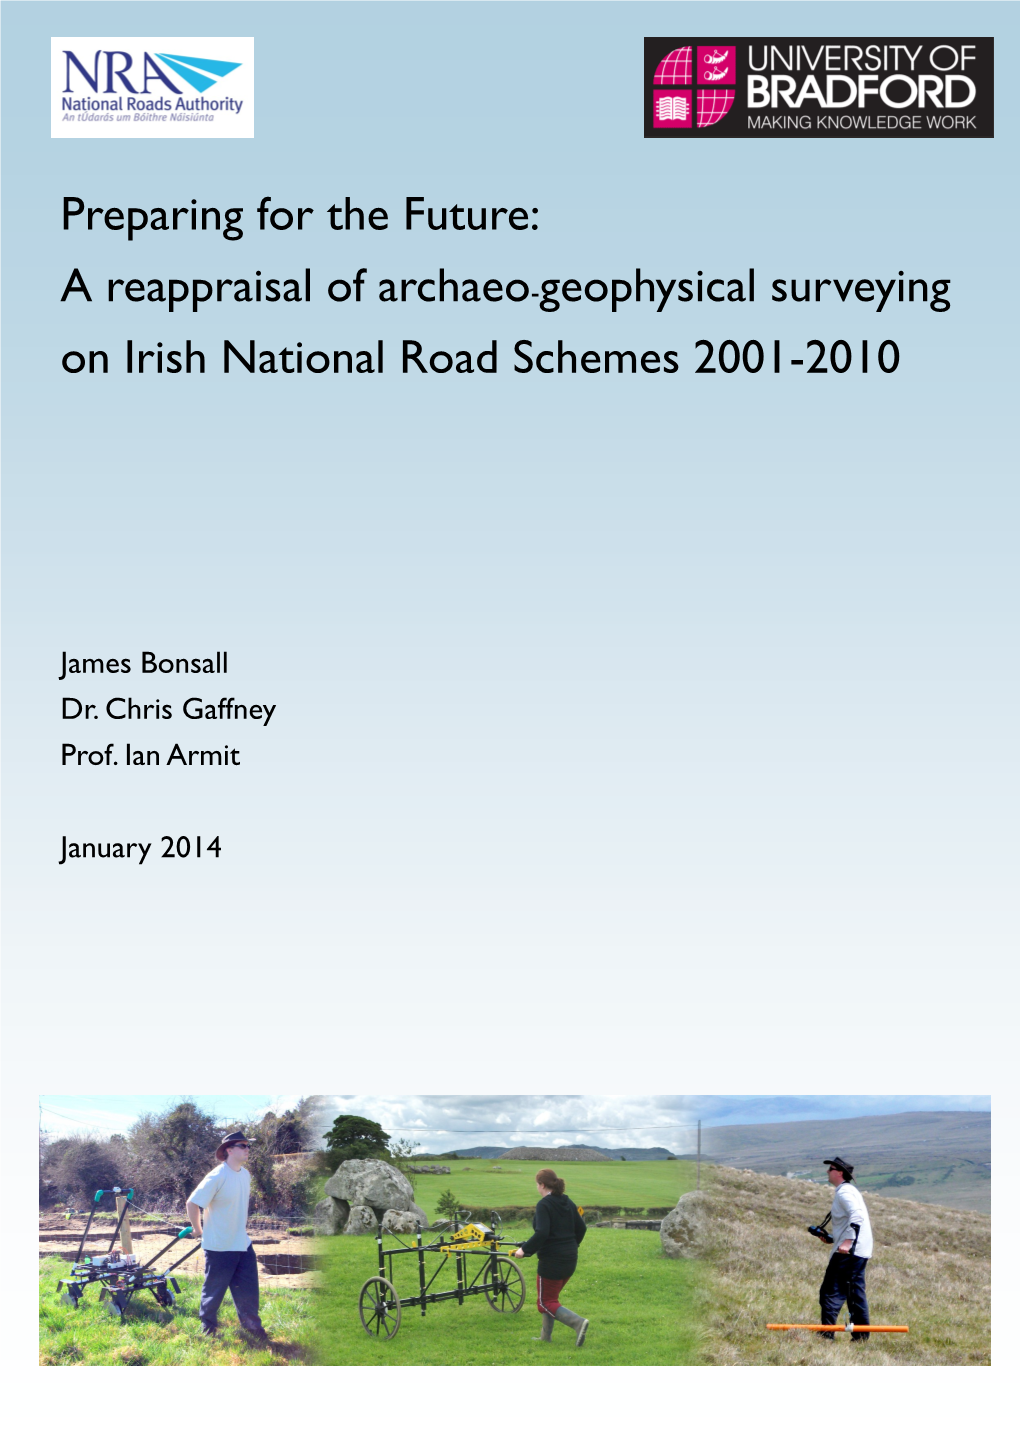 Preparing for the Future: a Reappraisal of Archaeo-Geophysical Surveying